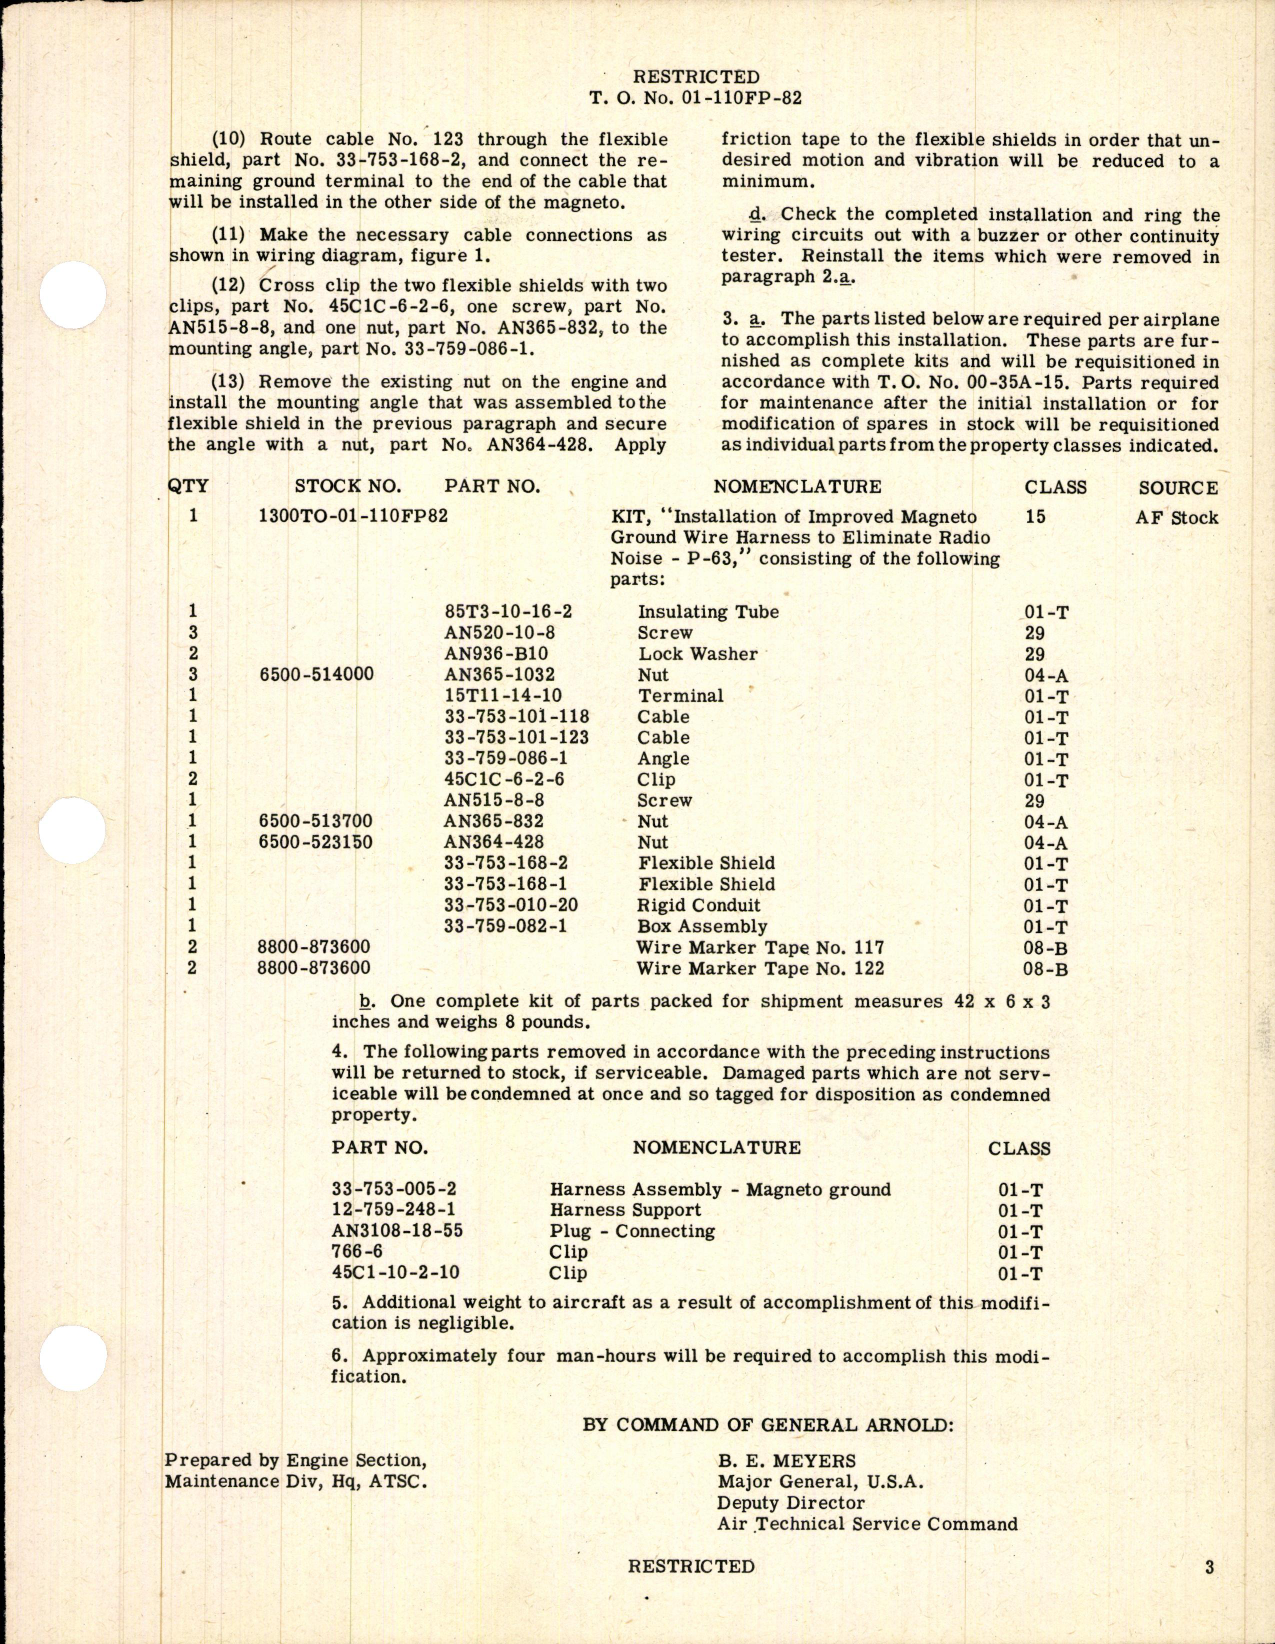 Sample page 3 from AirCorps Library document: Installation of Improved Magneto Ground Wire